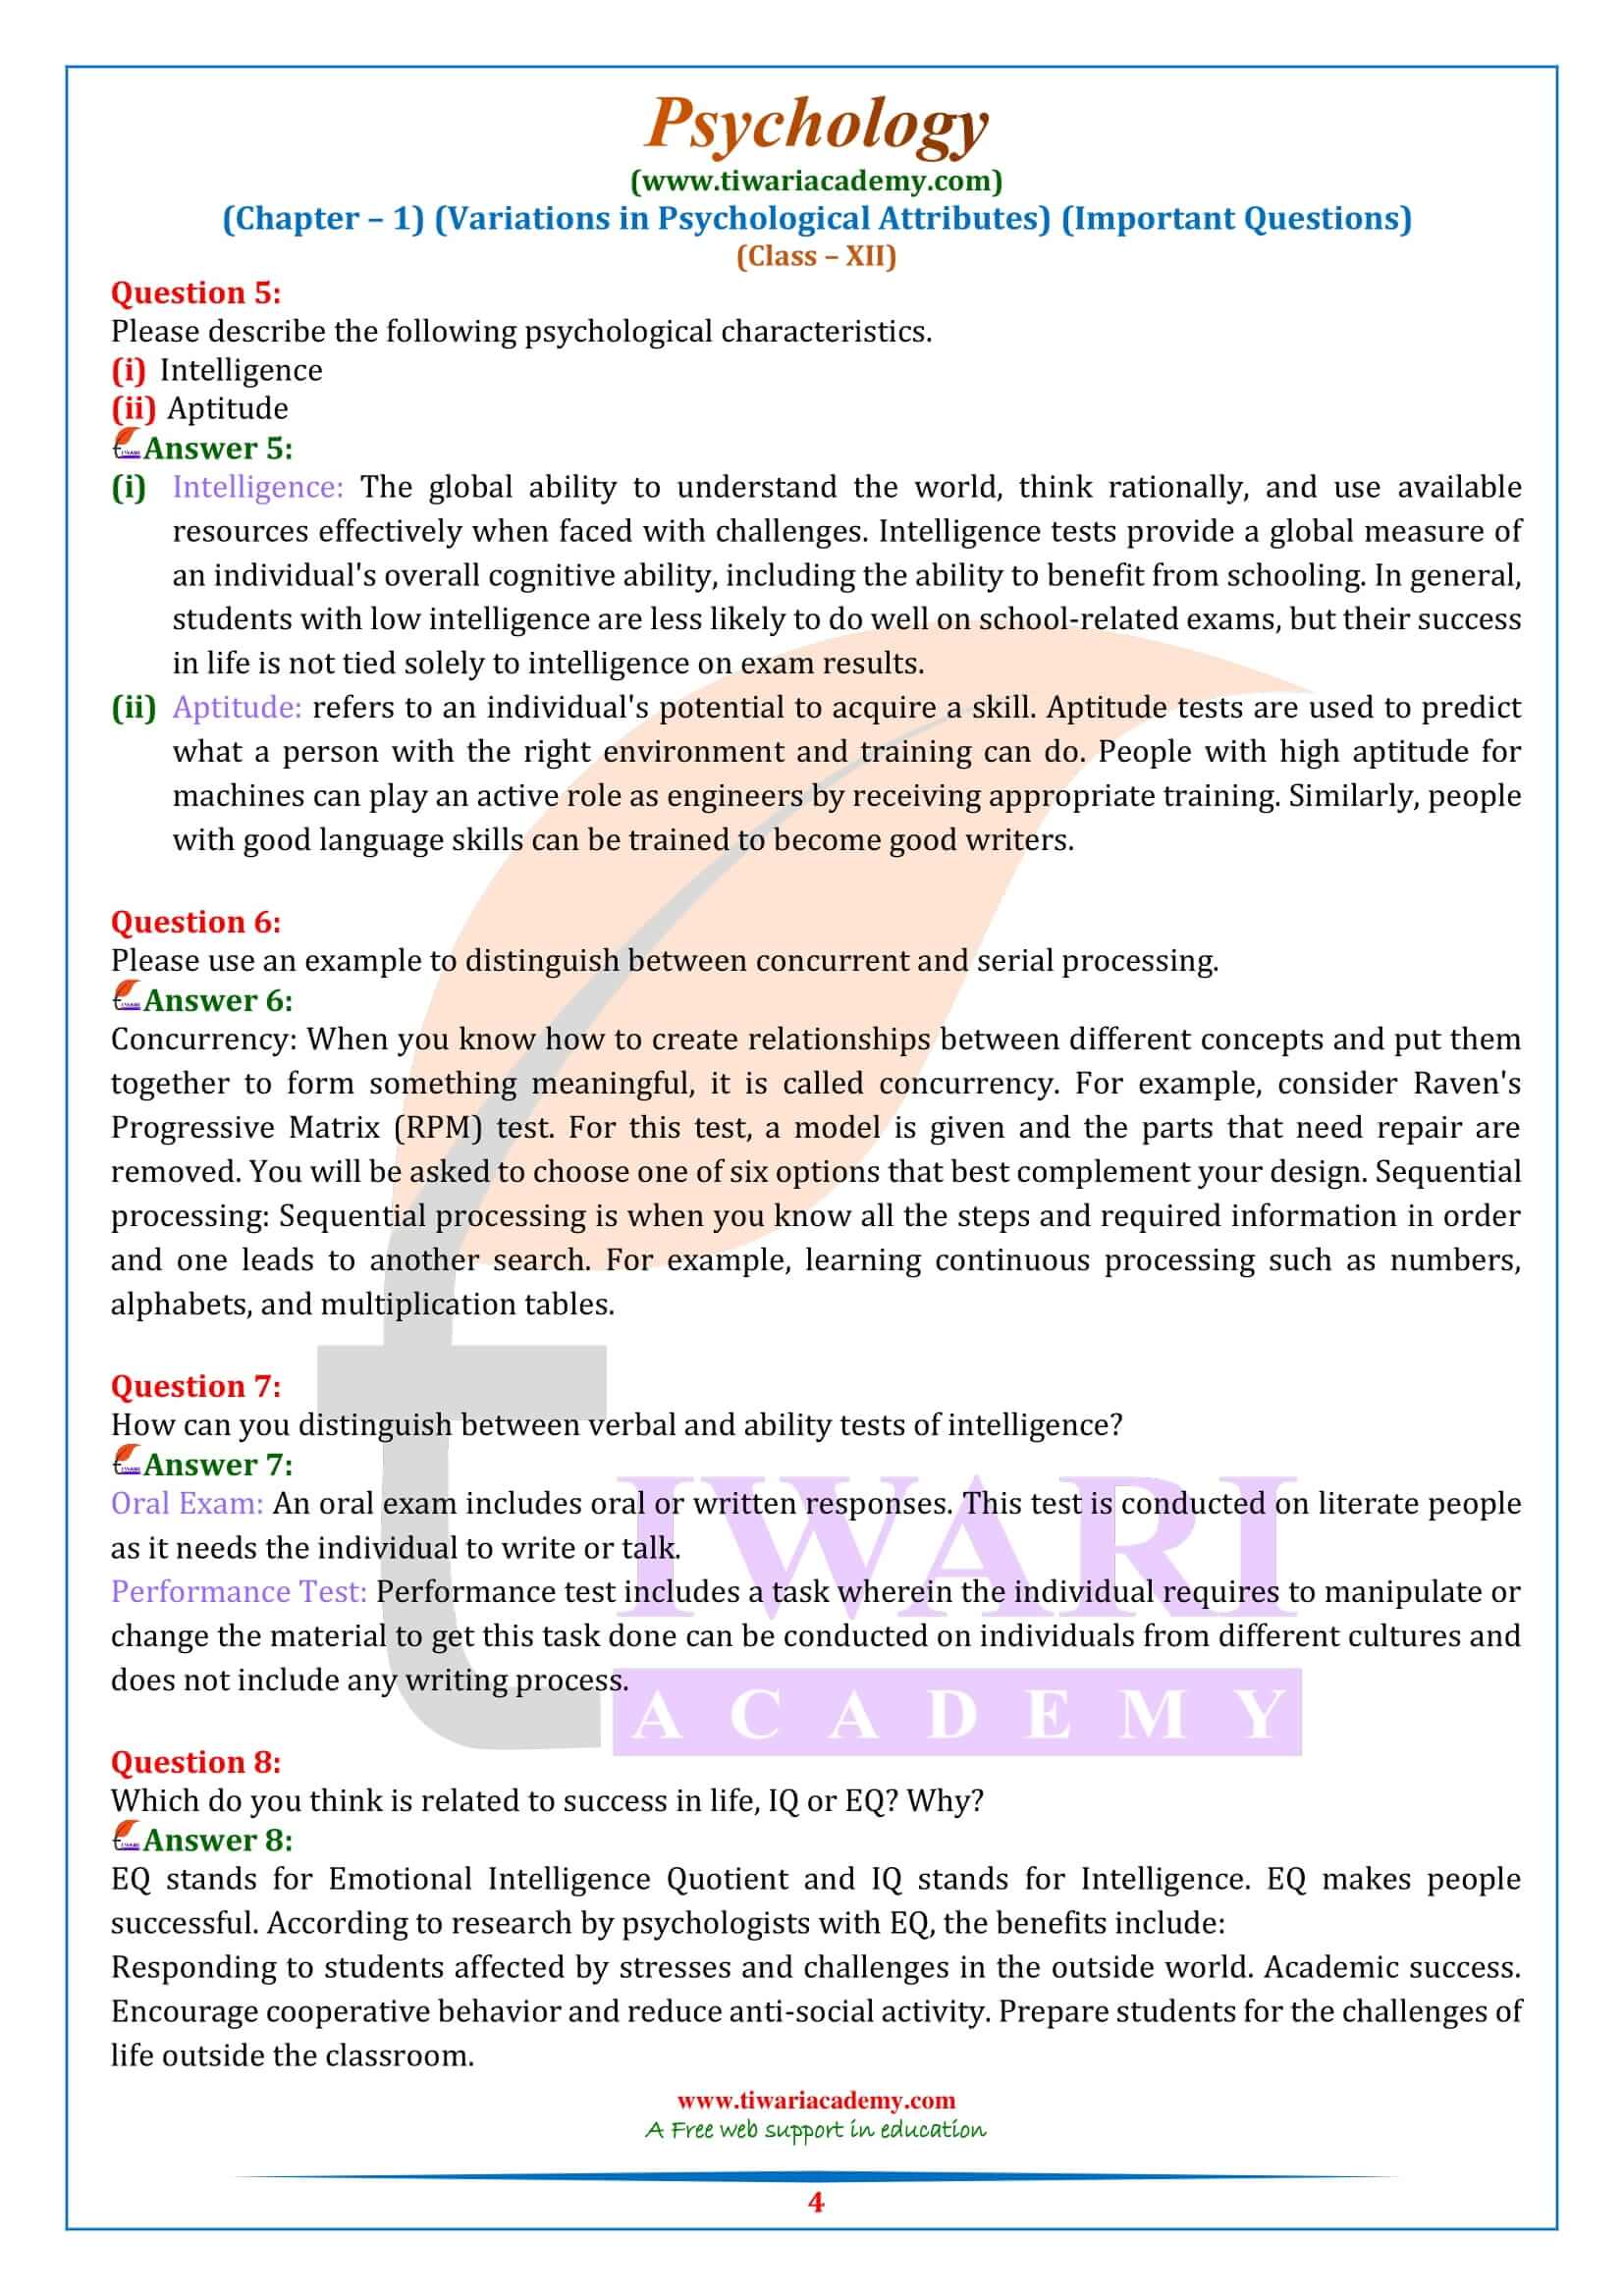 case study based questions class 12 psychology chapter 1